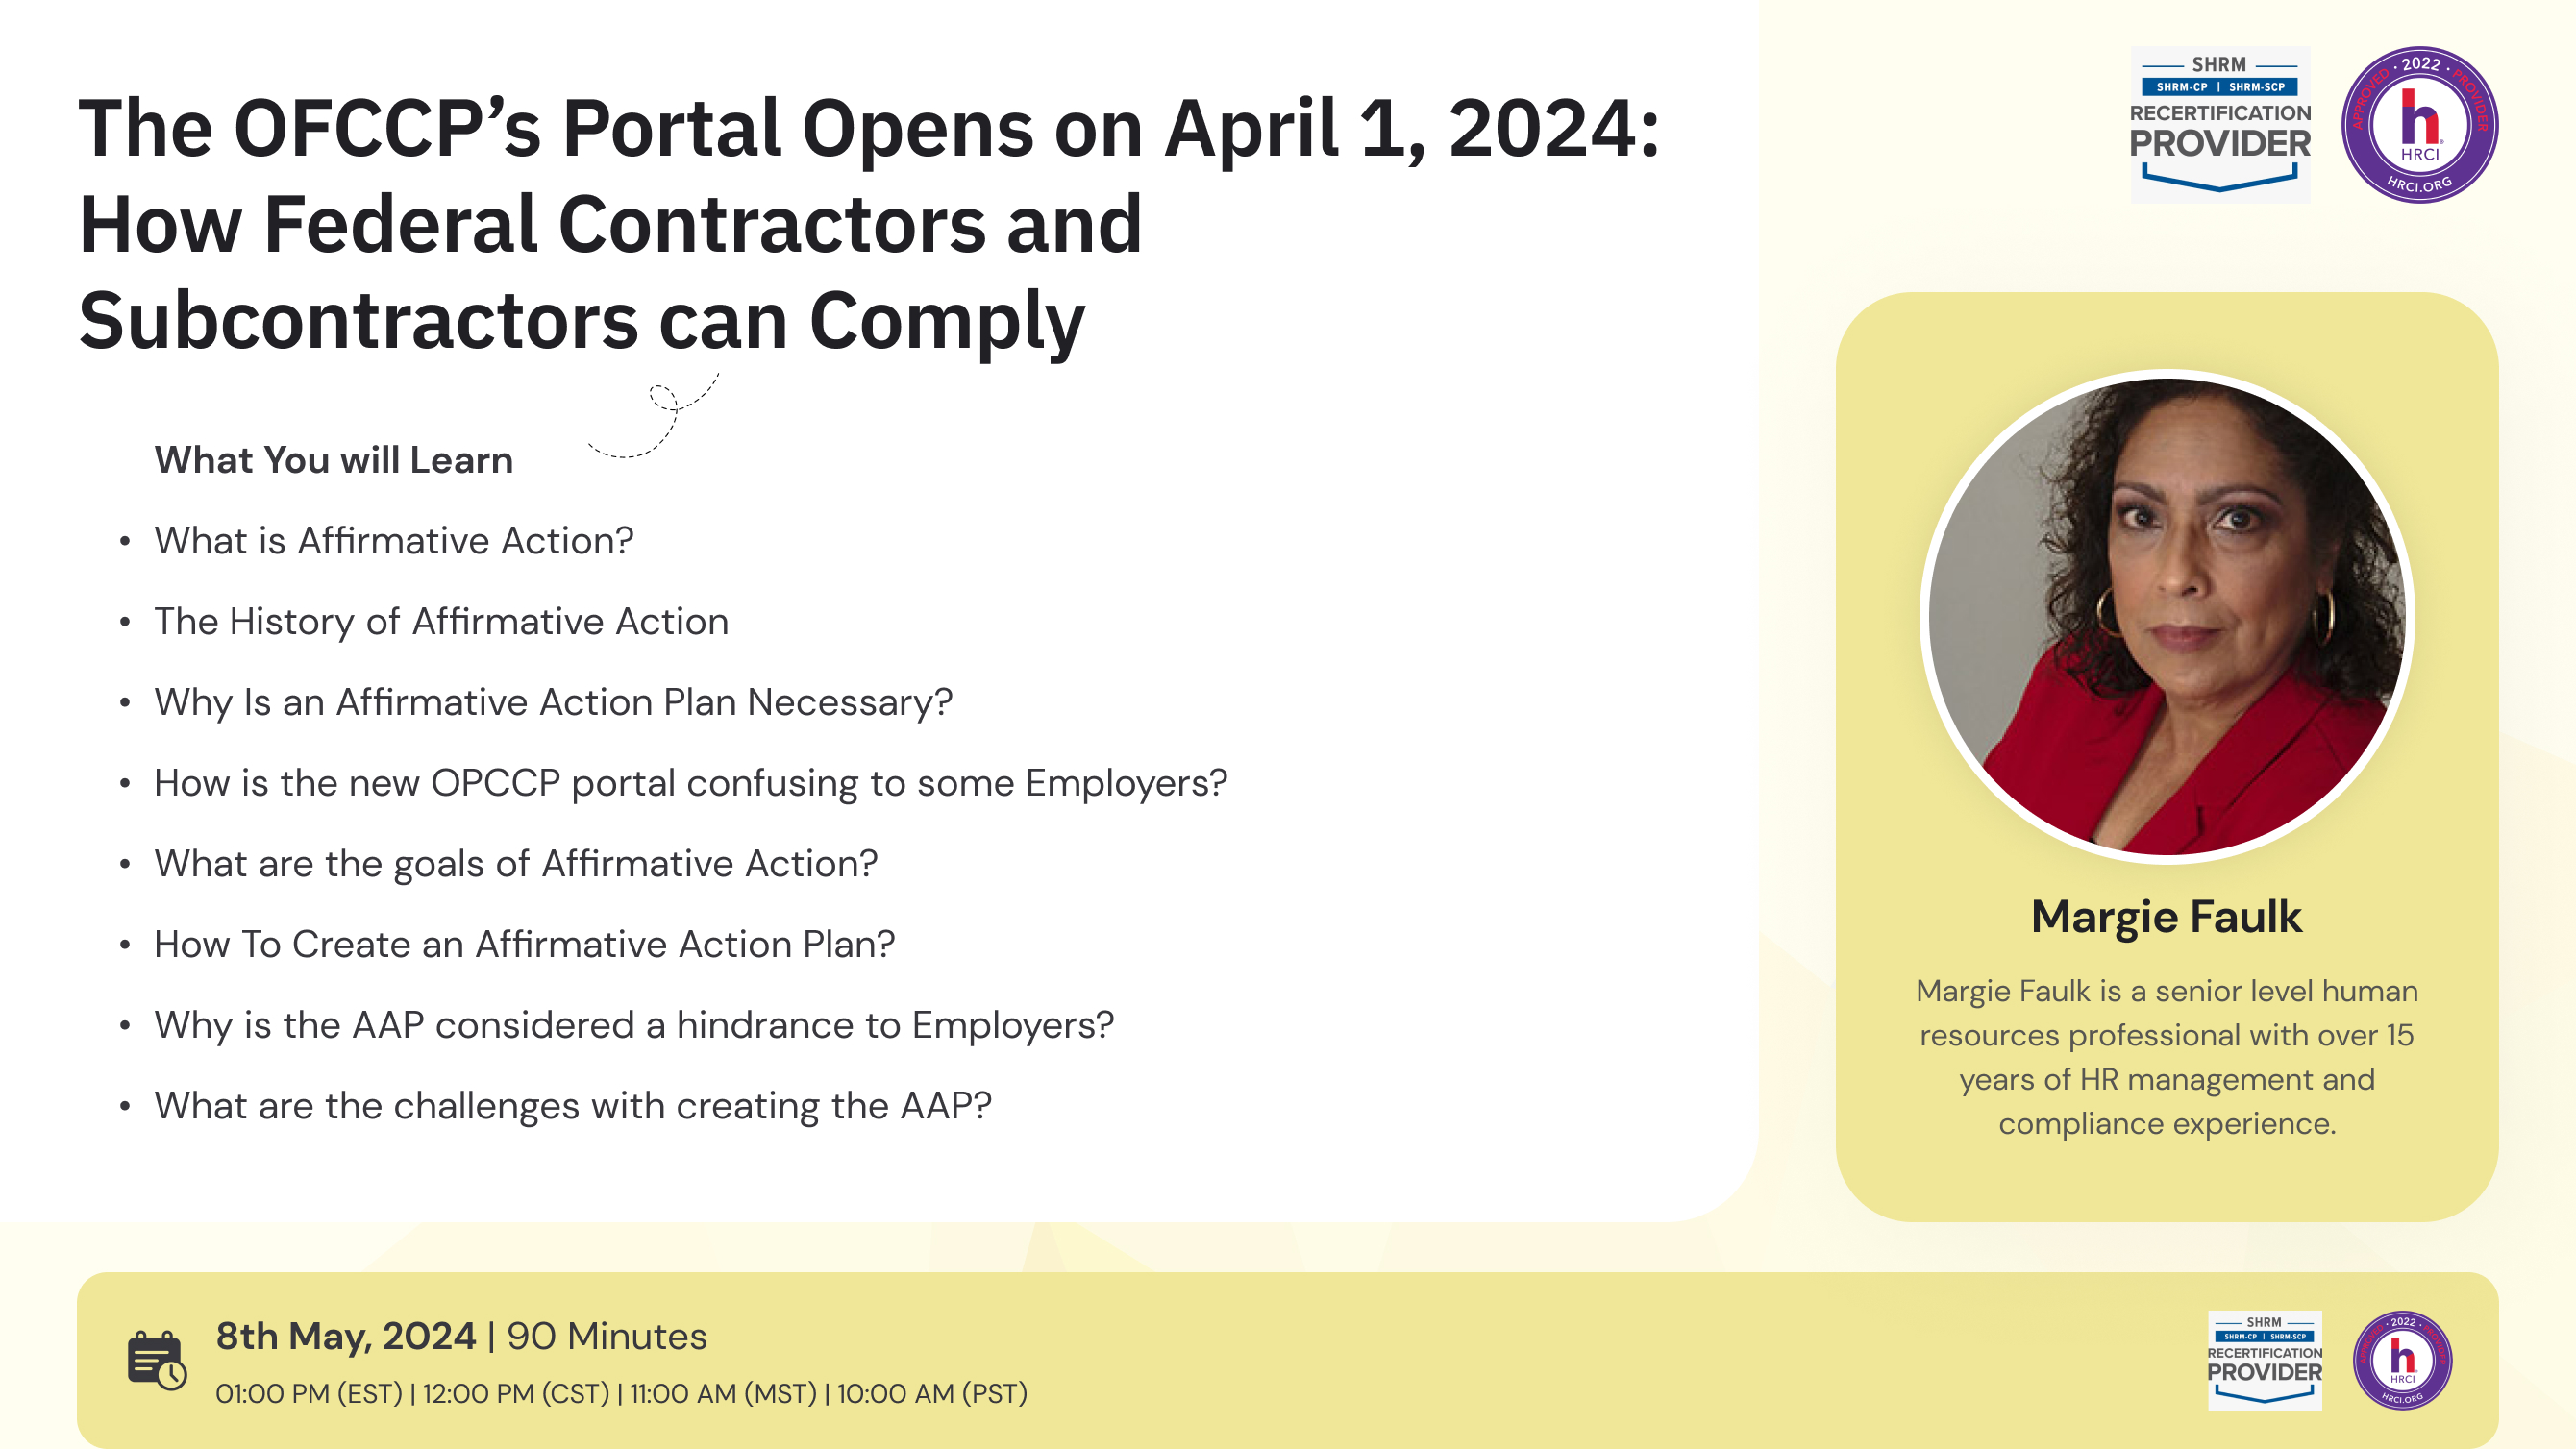 The OFCCP’s Portal Opens on April 1, 2024: How Federal Contractors and Subcontractors can Comply